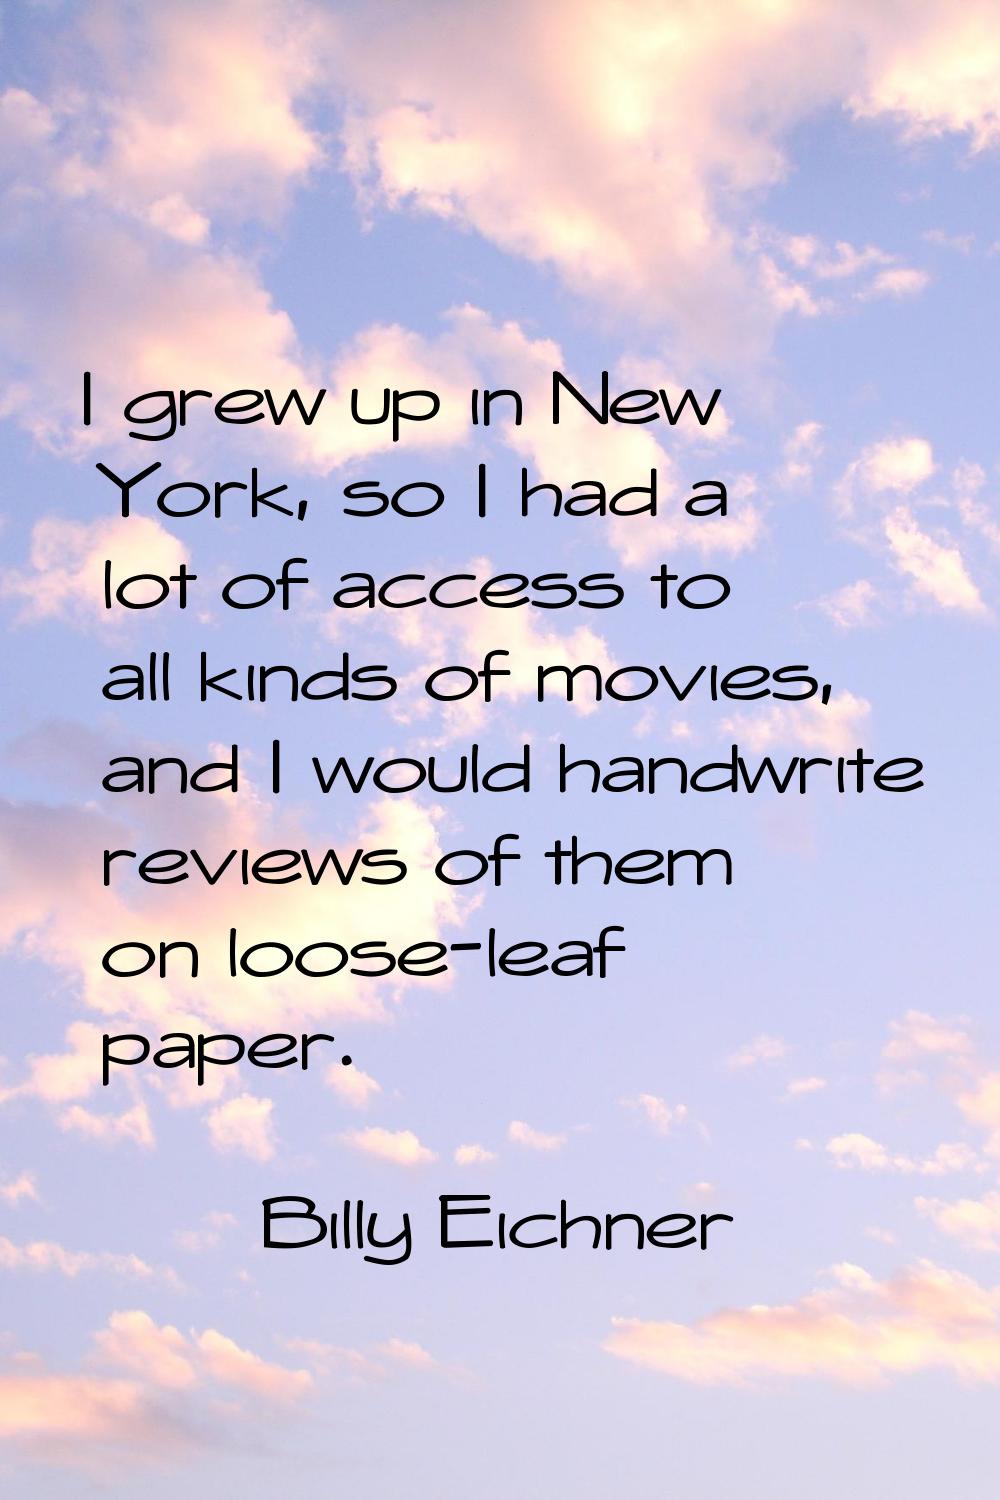 I grew up in New York, so I had a lot of access to all kinds of movies, and I would handwrite revie